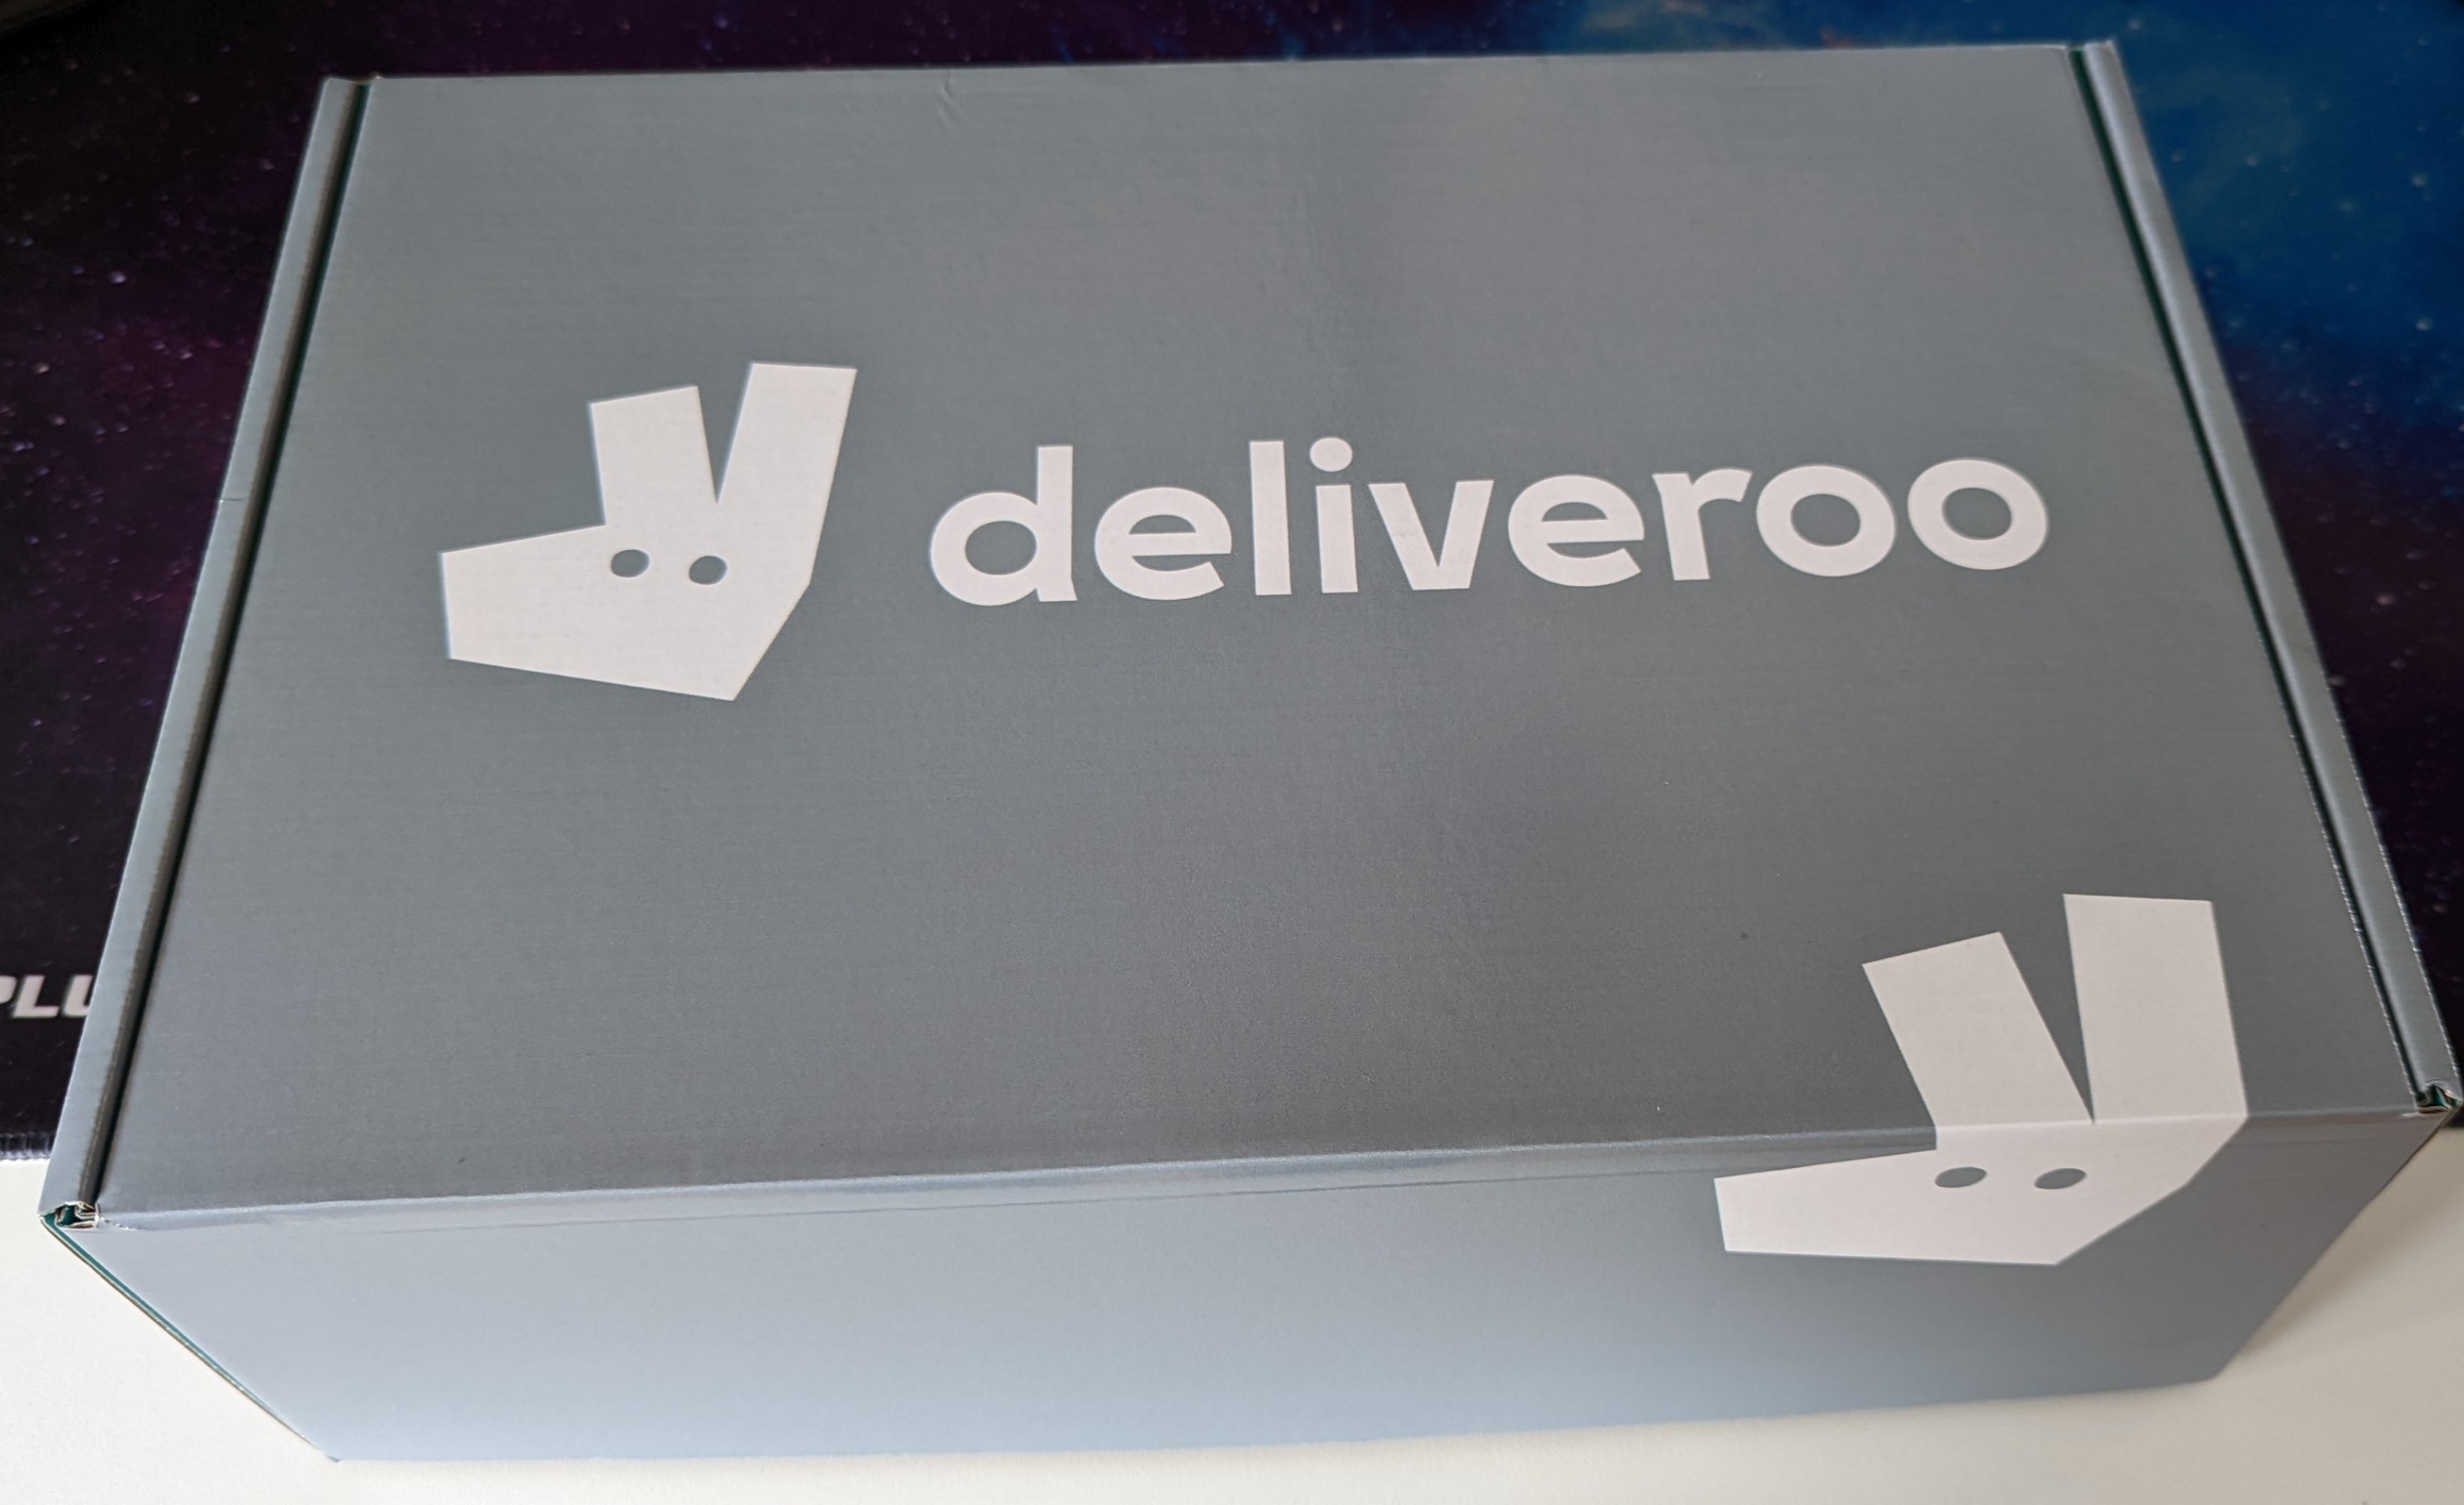 A box with the Deliveroo name and logo on it, in the Deliveroo grey